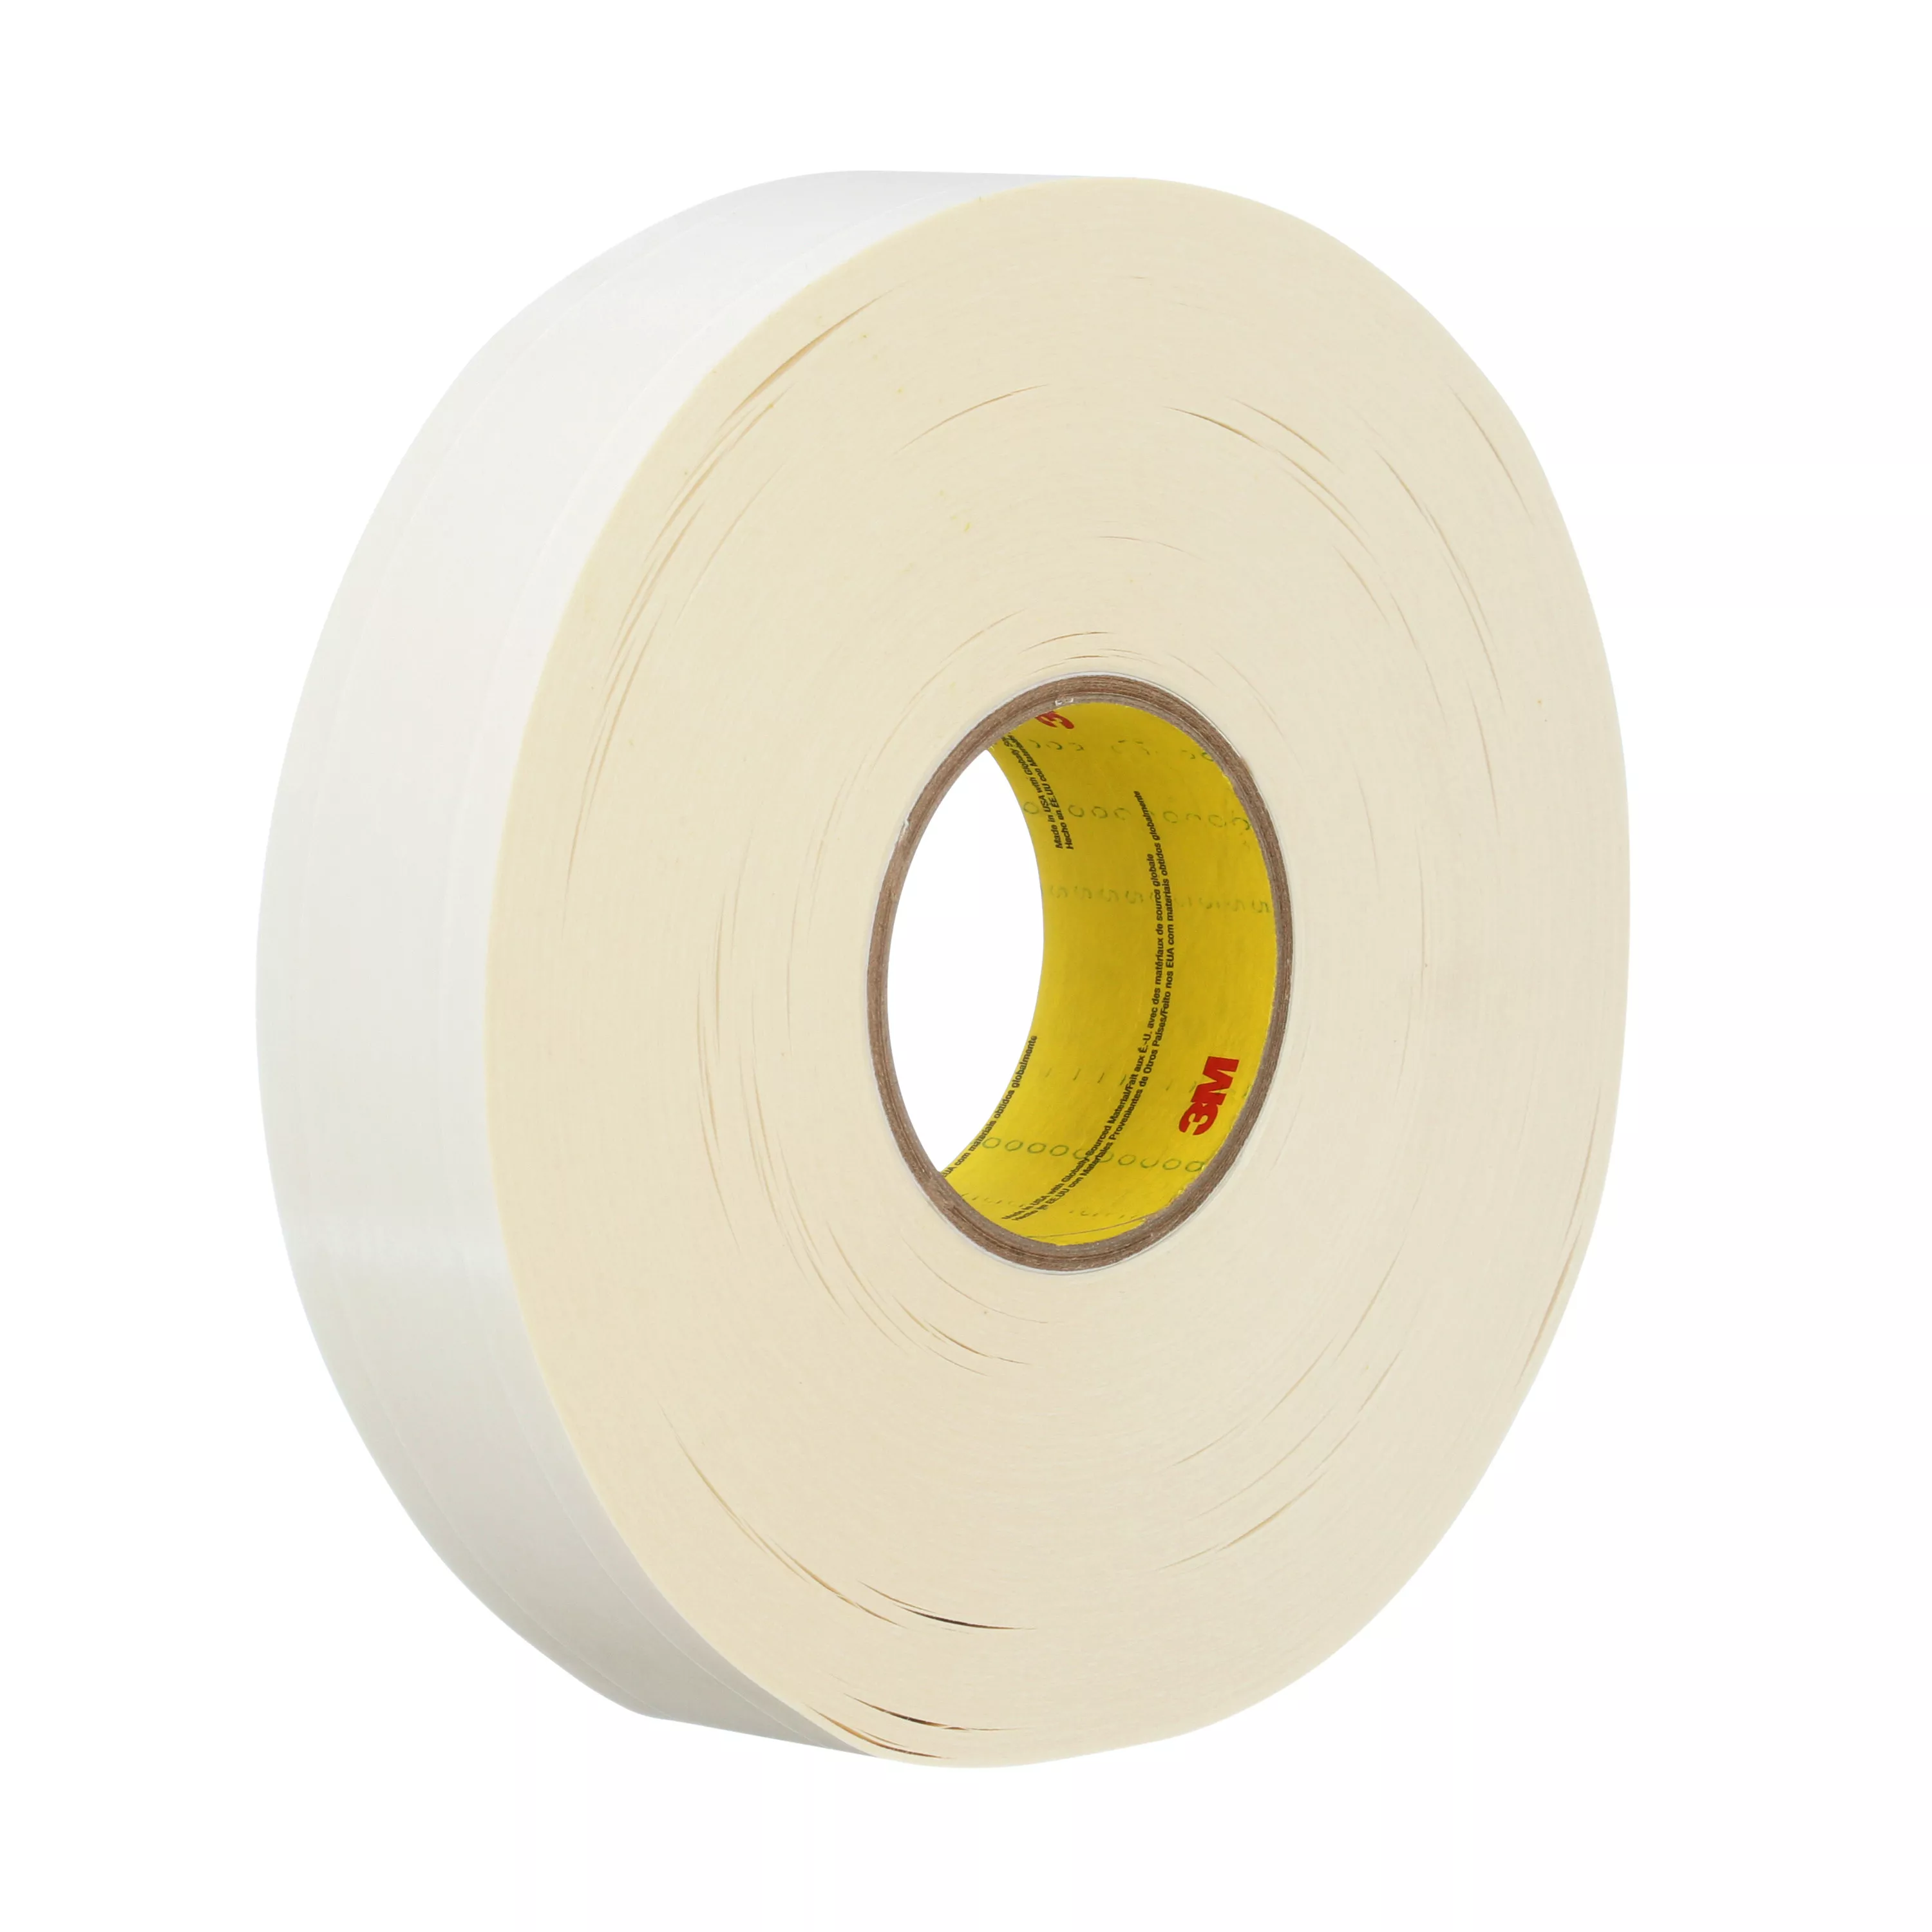 SKU 7100028163 | 3M™ Repulpable Heavy Duty Double Coated Tape R3287